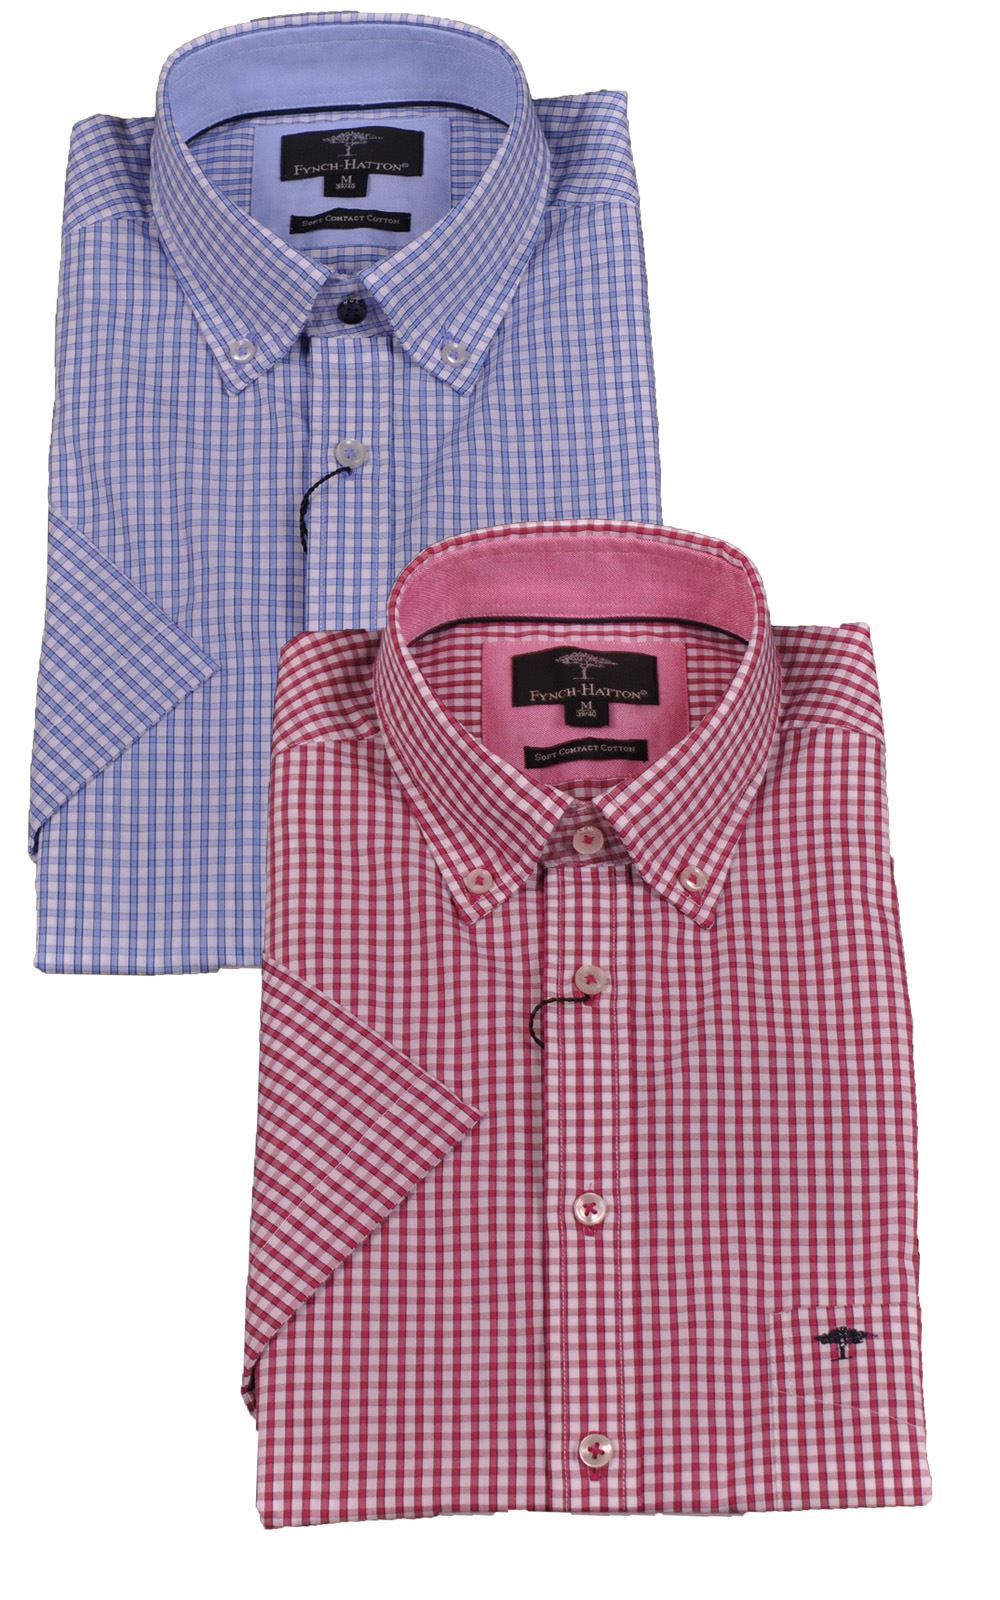 Picture of Fynch Hatton Short Sleeve Shirt 1120-5021